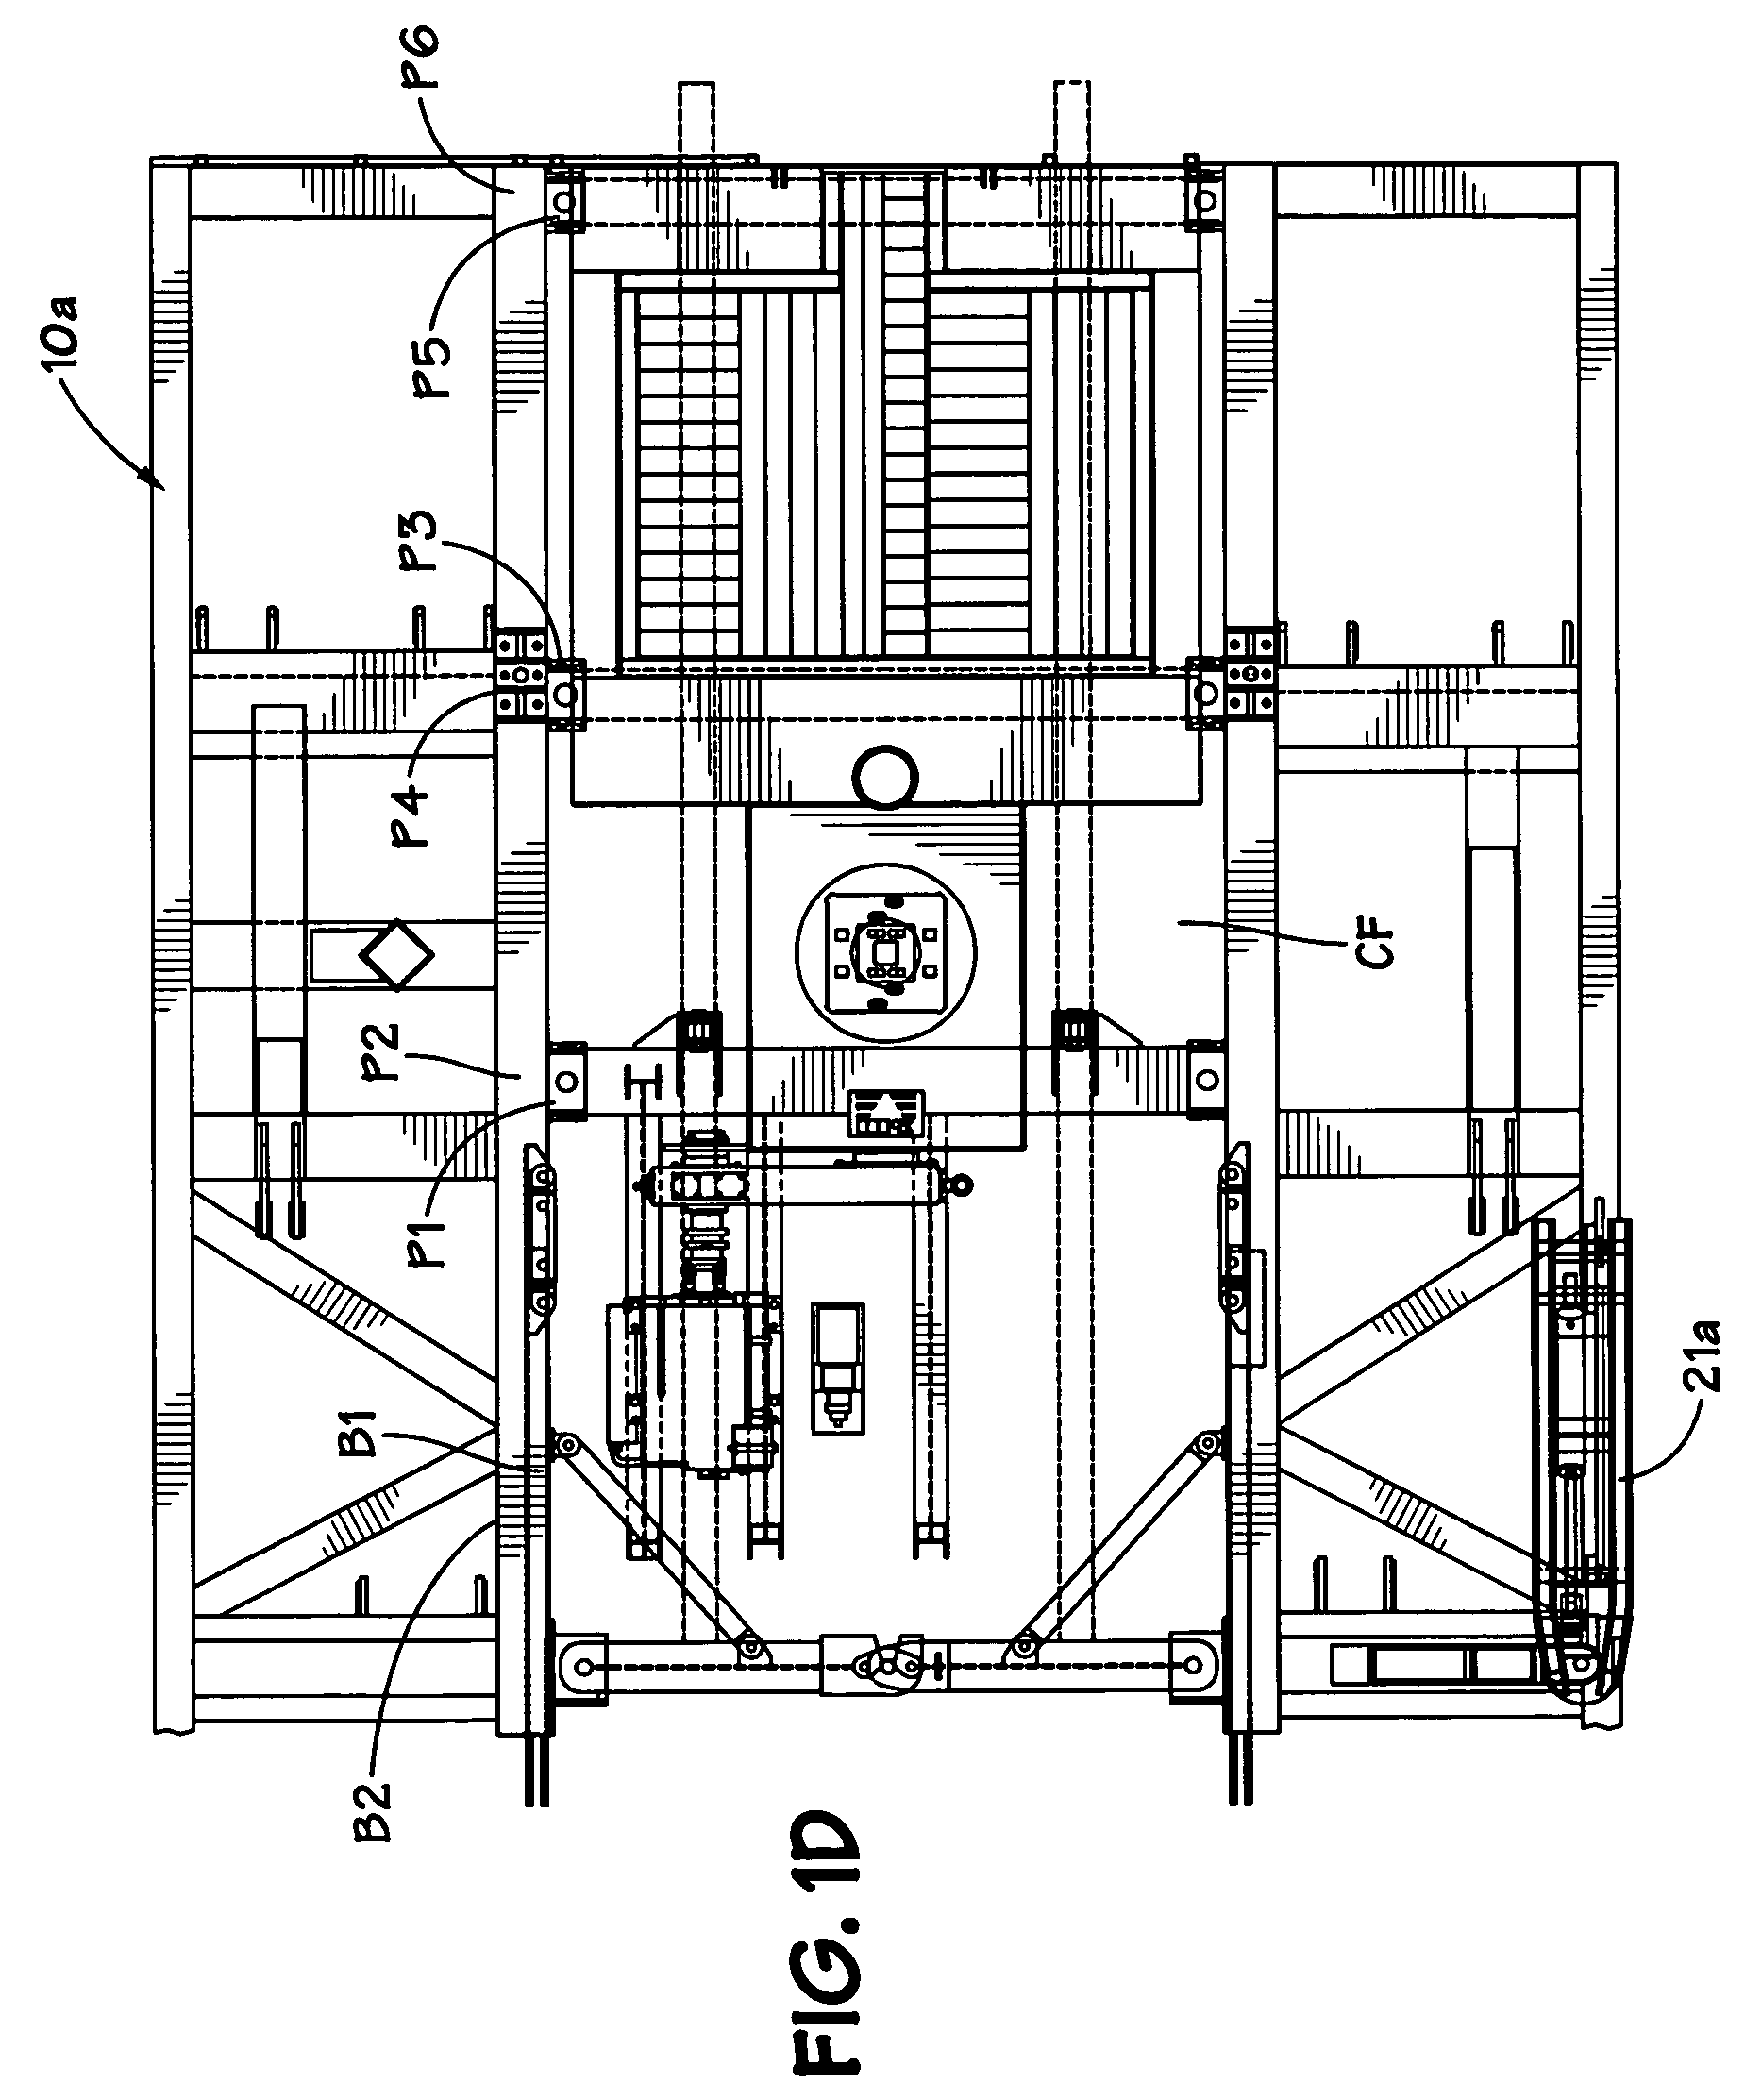 Drilling rig structure installation and methods